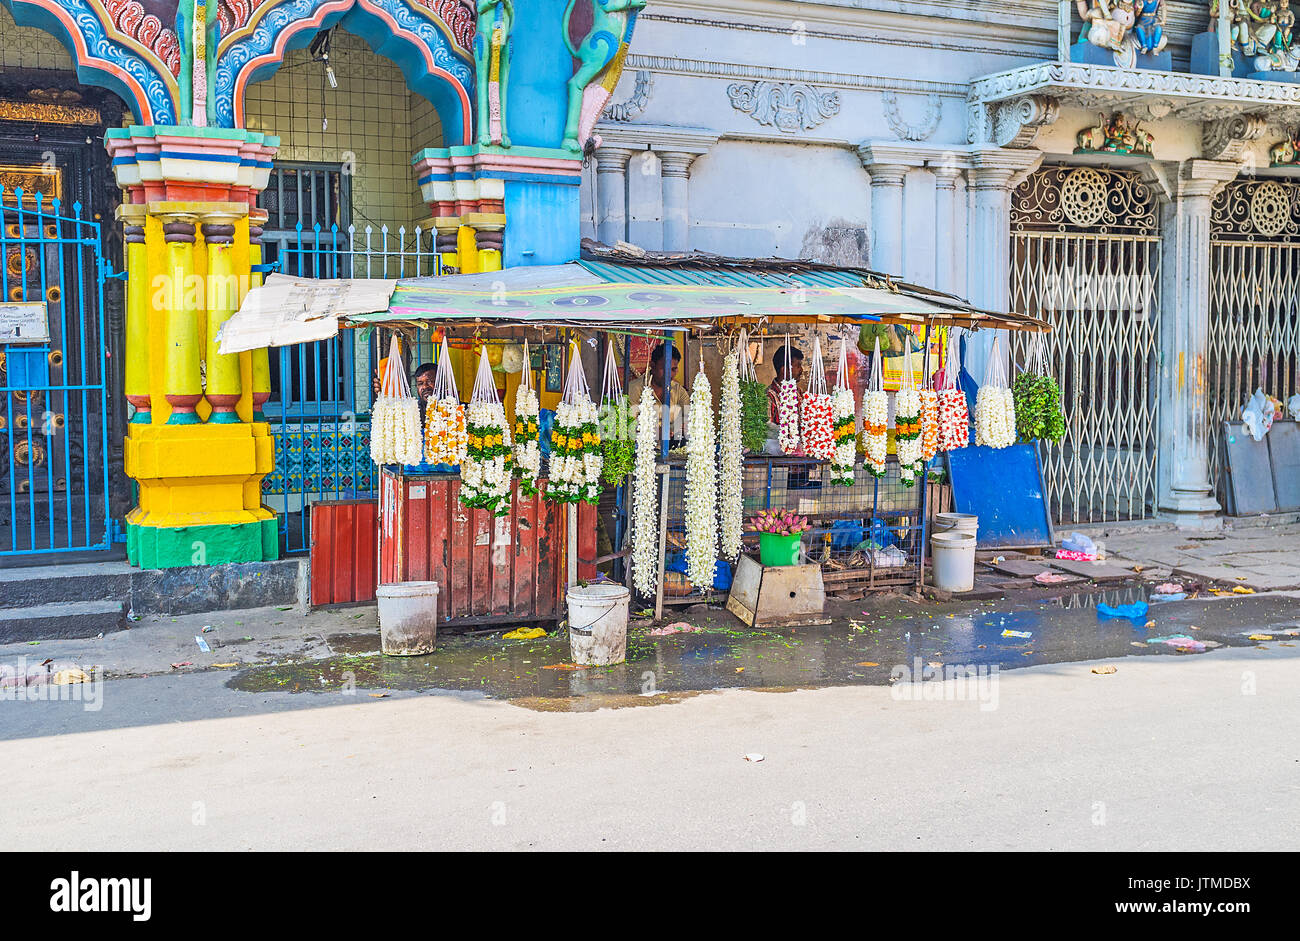 COLOMBO, SRI LANKA - DECEMBER 7, 2016: The flower garlands are important for the Hindus, so the stalls with such goods are located next to the Kovils, Stock Photo